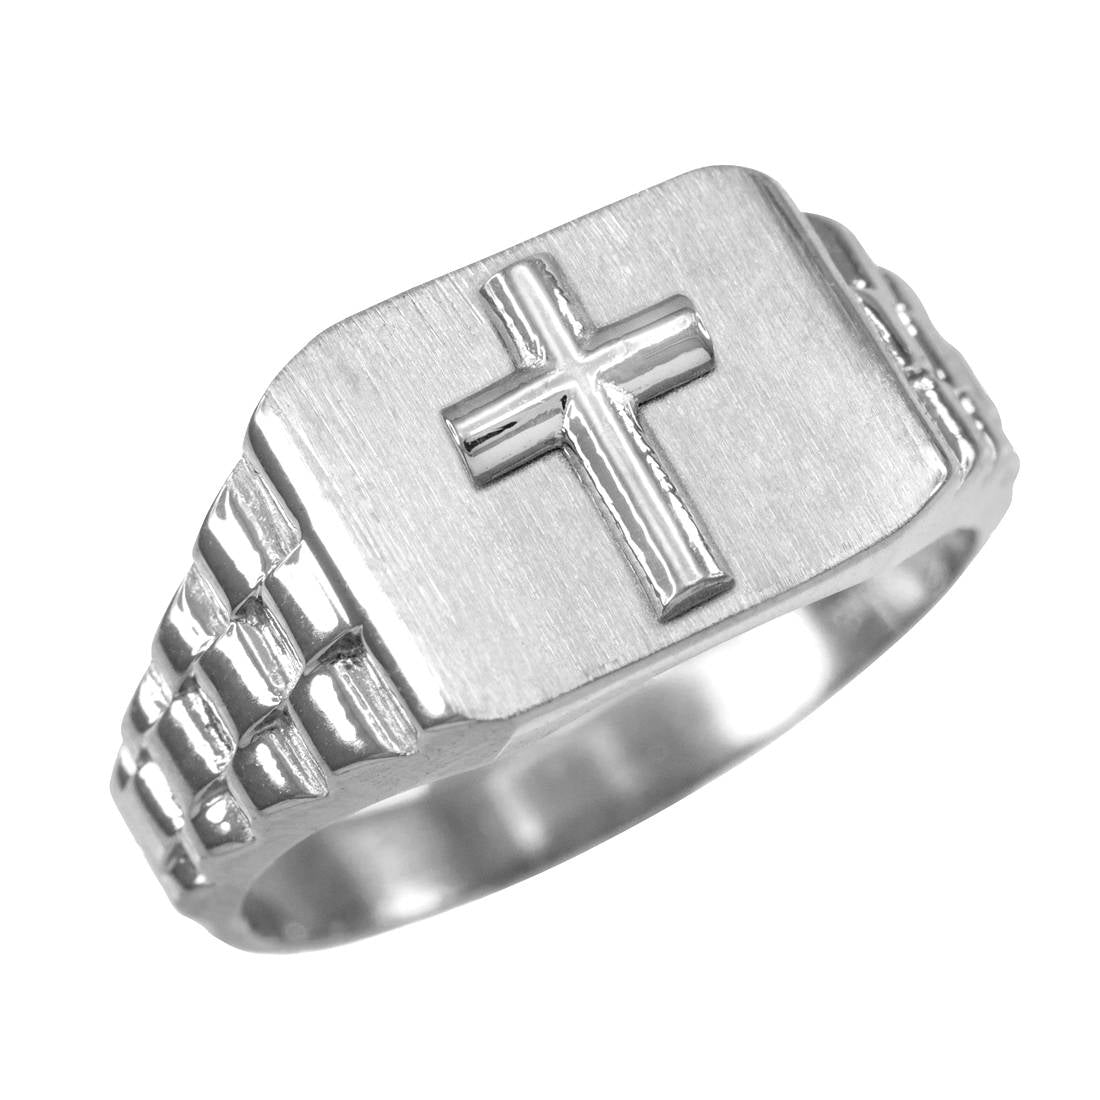 Sterling Silver rolex style Square Cross Ring - Mens Silver Cross Ring Karma Blingz